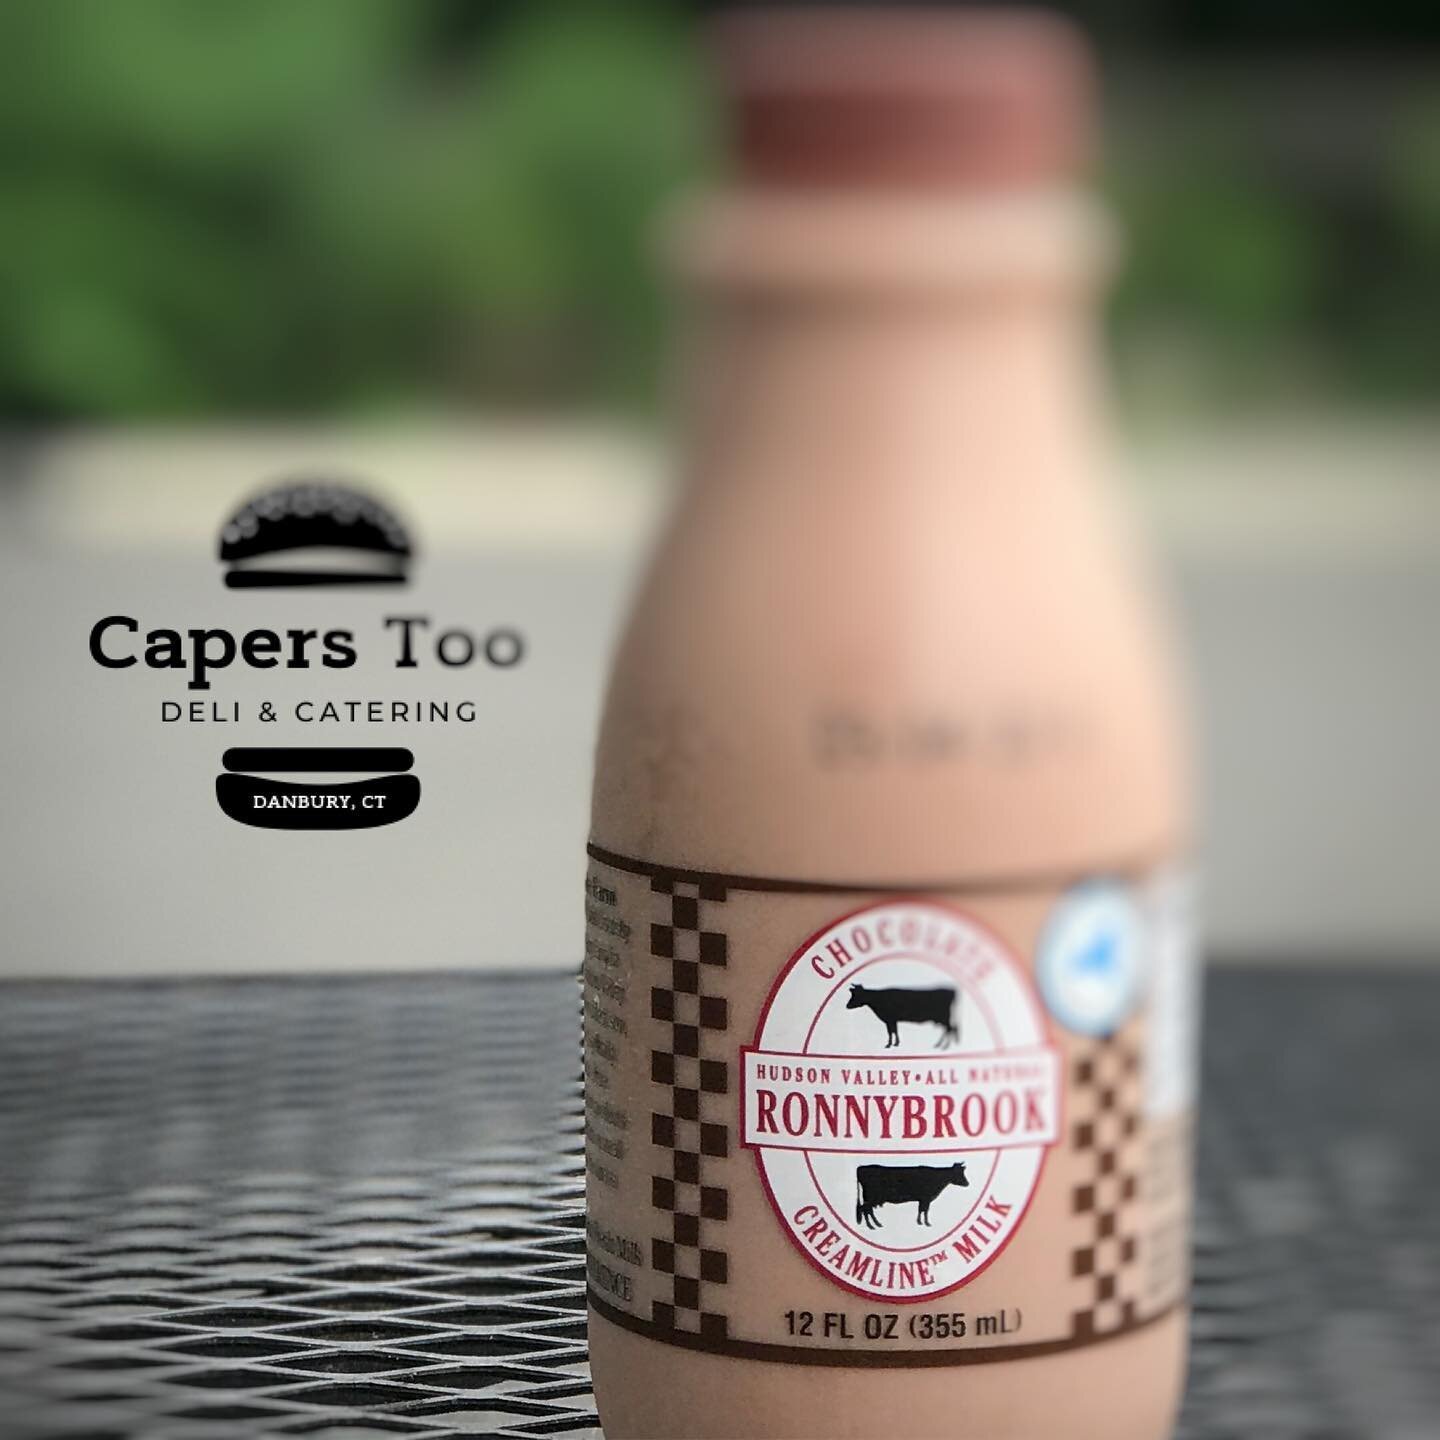 Local Ronnybrook Chocolate Milk from Hudson Valley.

Ronnybrook is a local Hudson Valley Dairy Farm that raises their own cows. Their Chocolate Creamline Milk is made with 100% natural chocolate and is the only chocolate milk rated excellent by the N